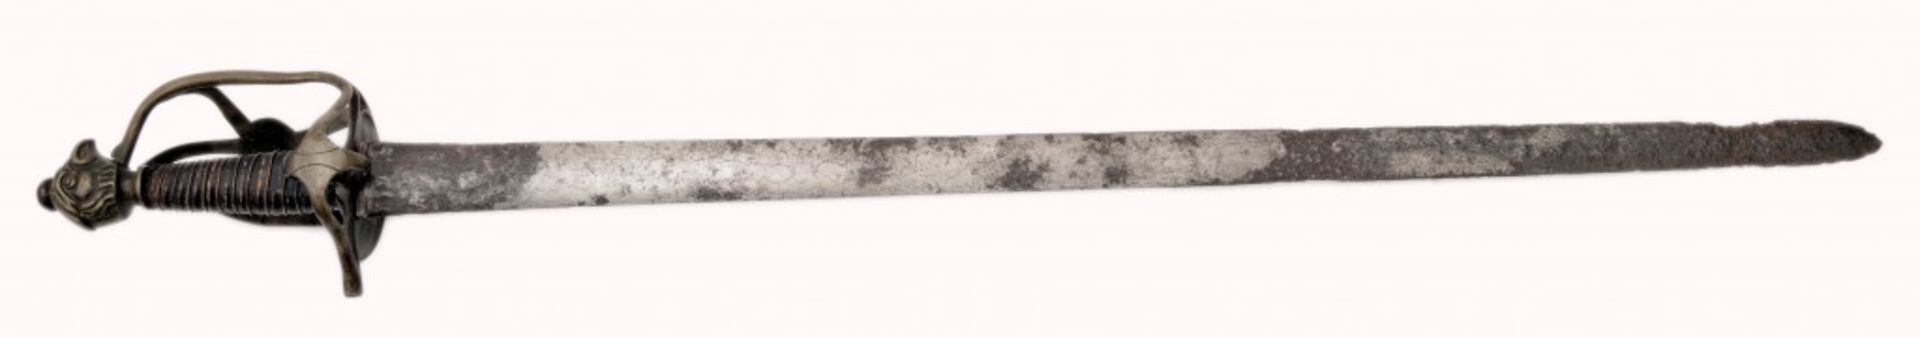 A Prussian Pattern 1734/47 Dragoon´s Sword - Image 6 of 6